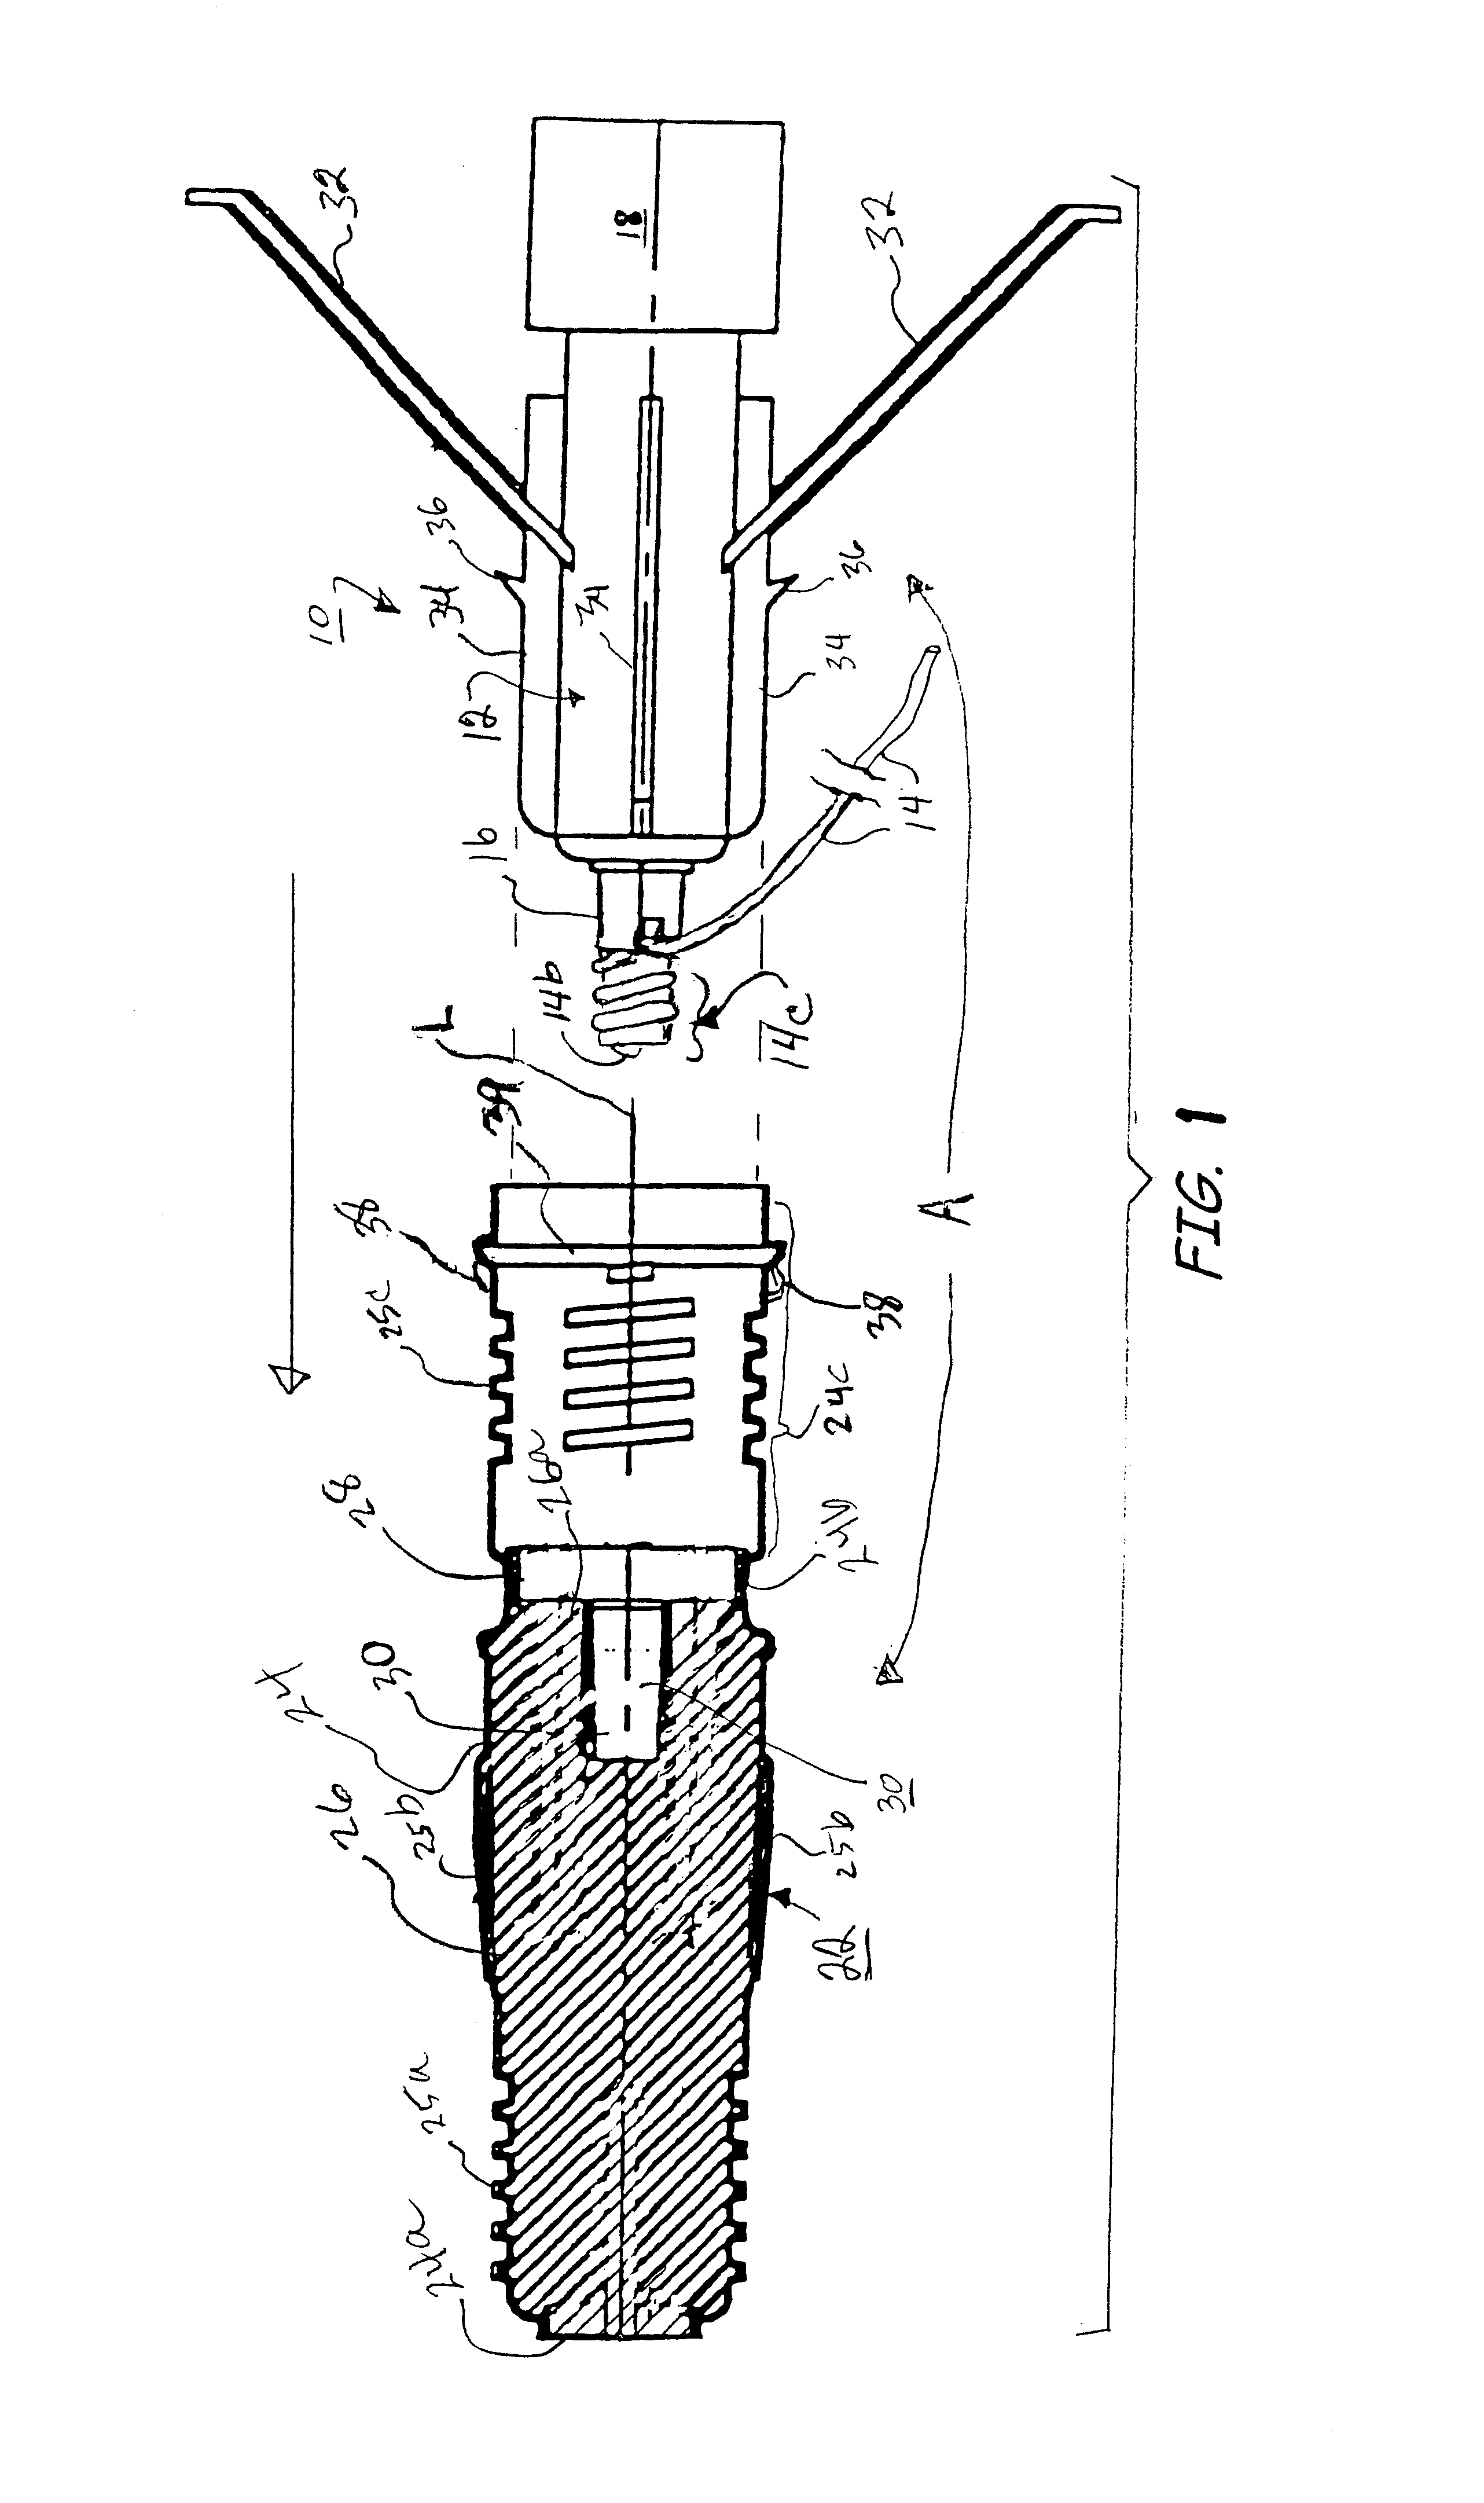 Accumulated detonating cord explosive charge and method of making and of use of the same